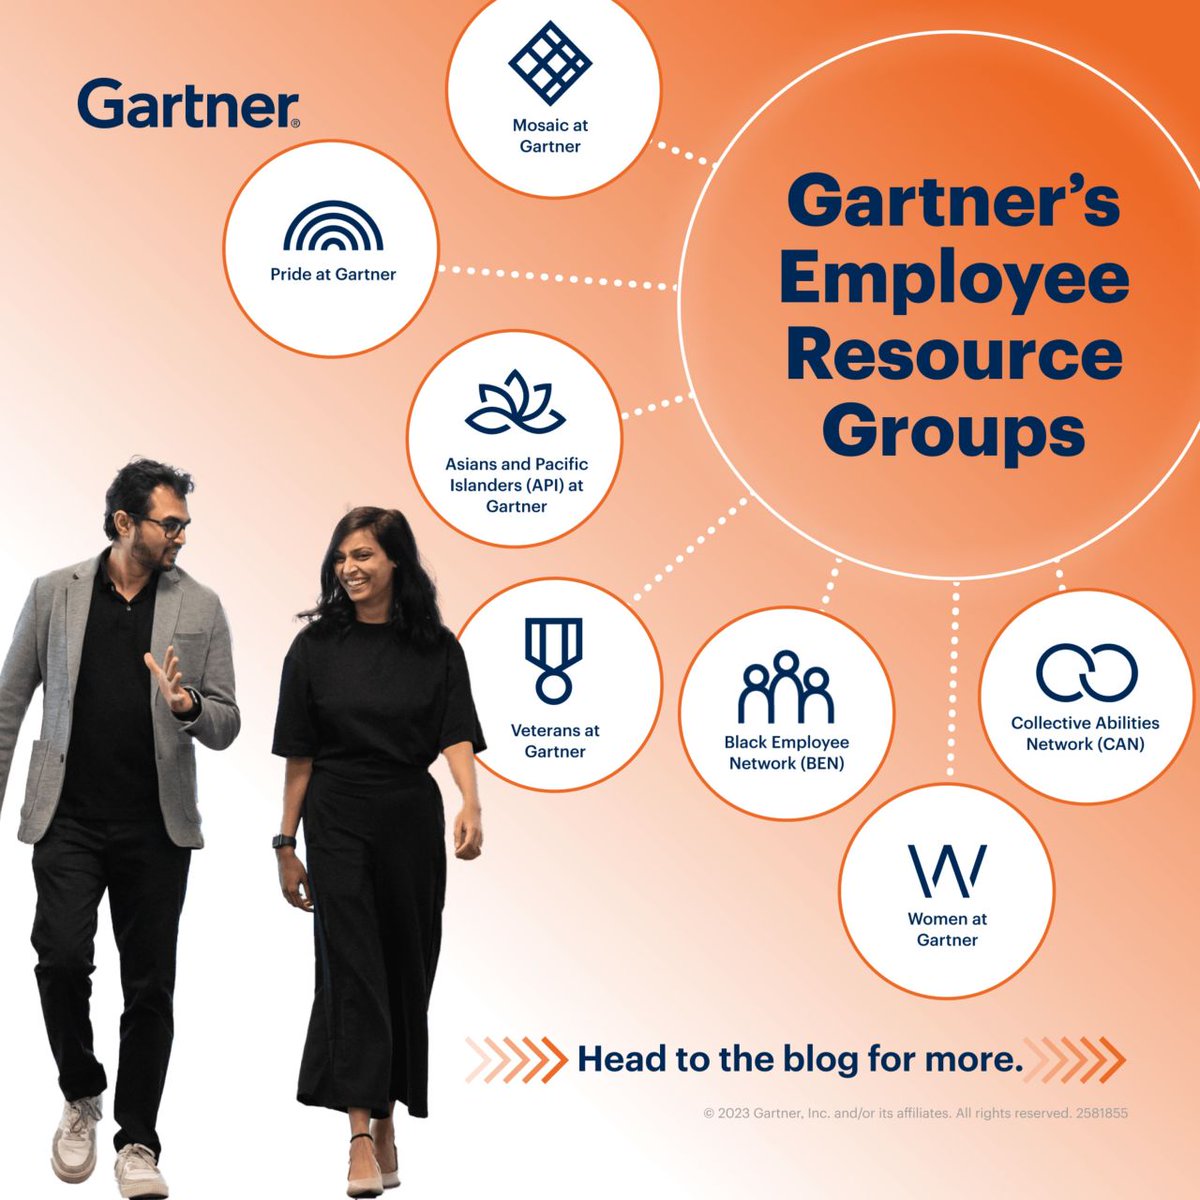 Gartner Employee Resource Groups support the associate experience by providing opportunities to connect, educate and celebrate moments that matter.

Learn more about our ERGs and about our ERG leaders: gtnr.it/4cZ48Kw #LifeAtGartner